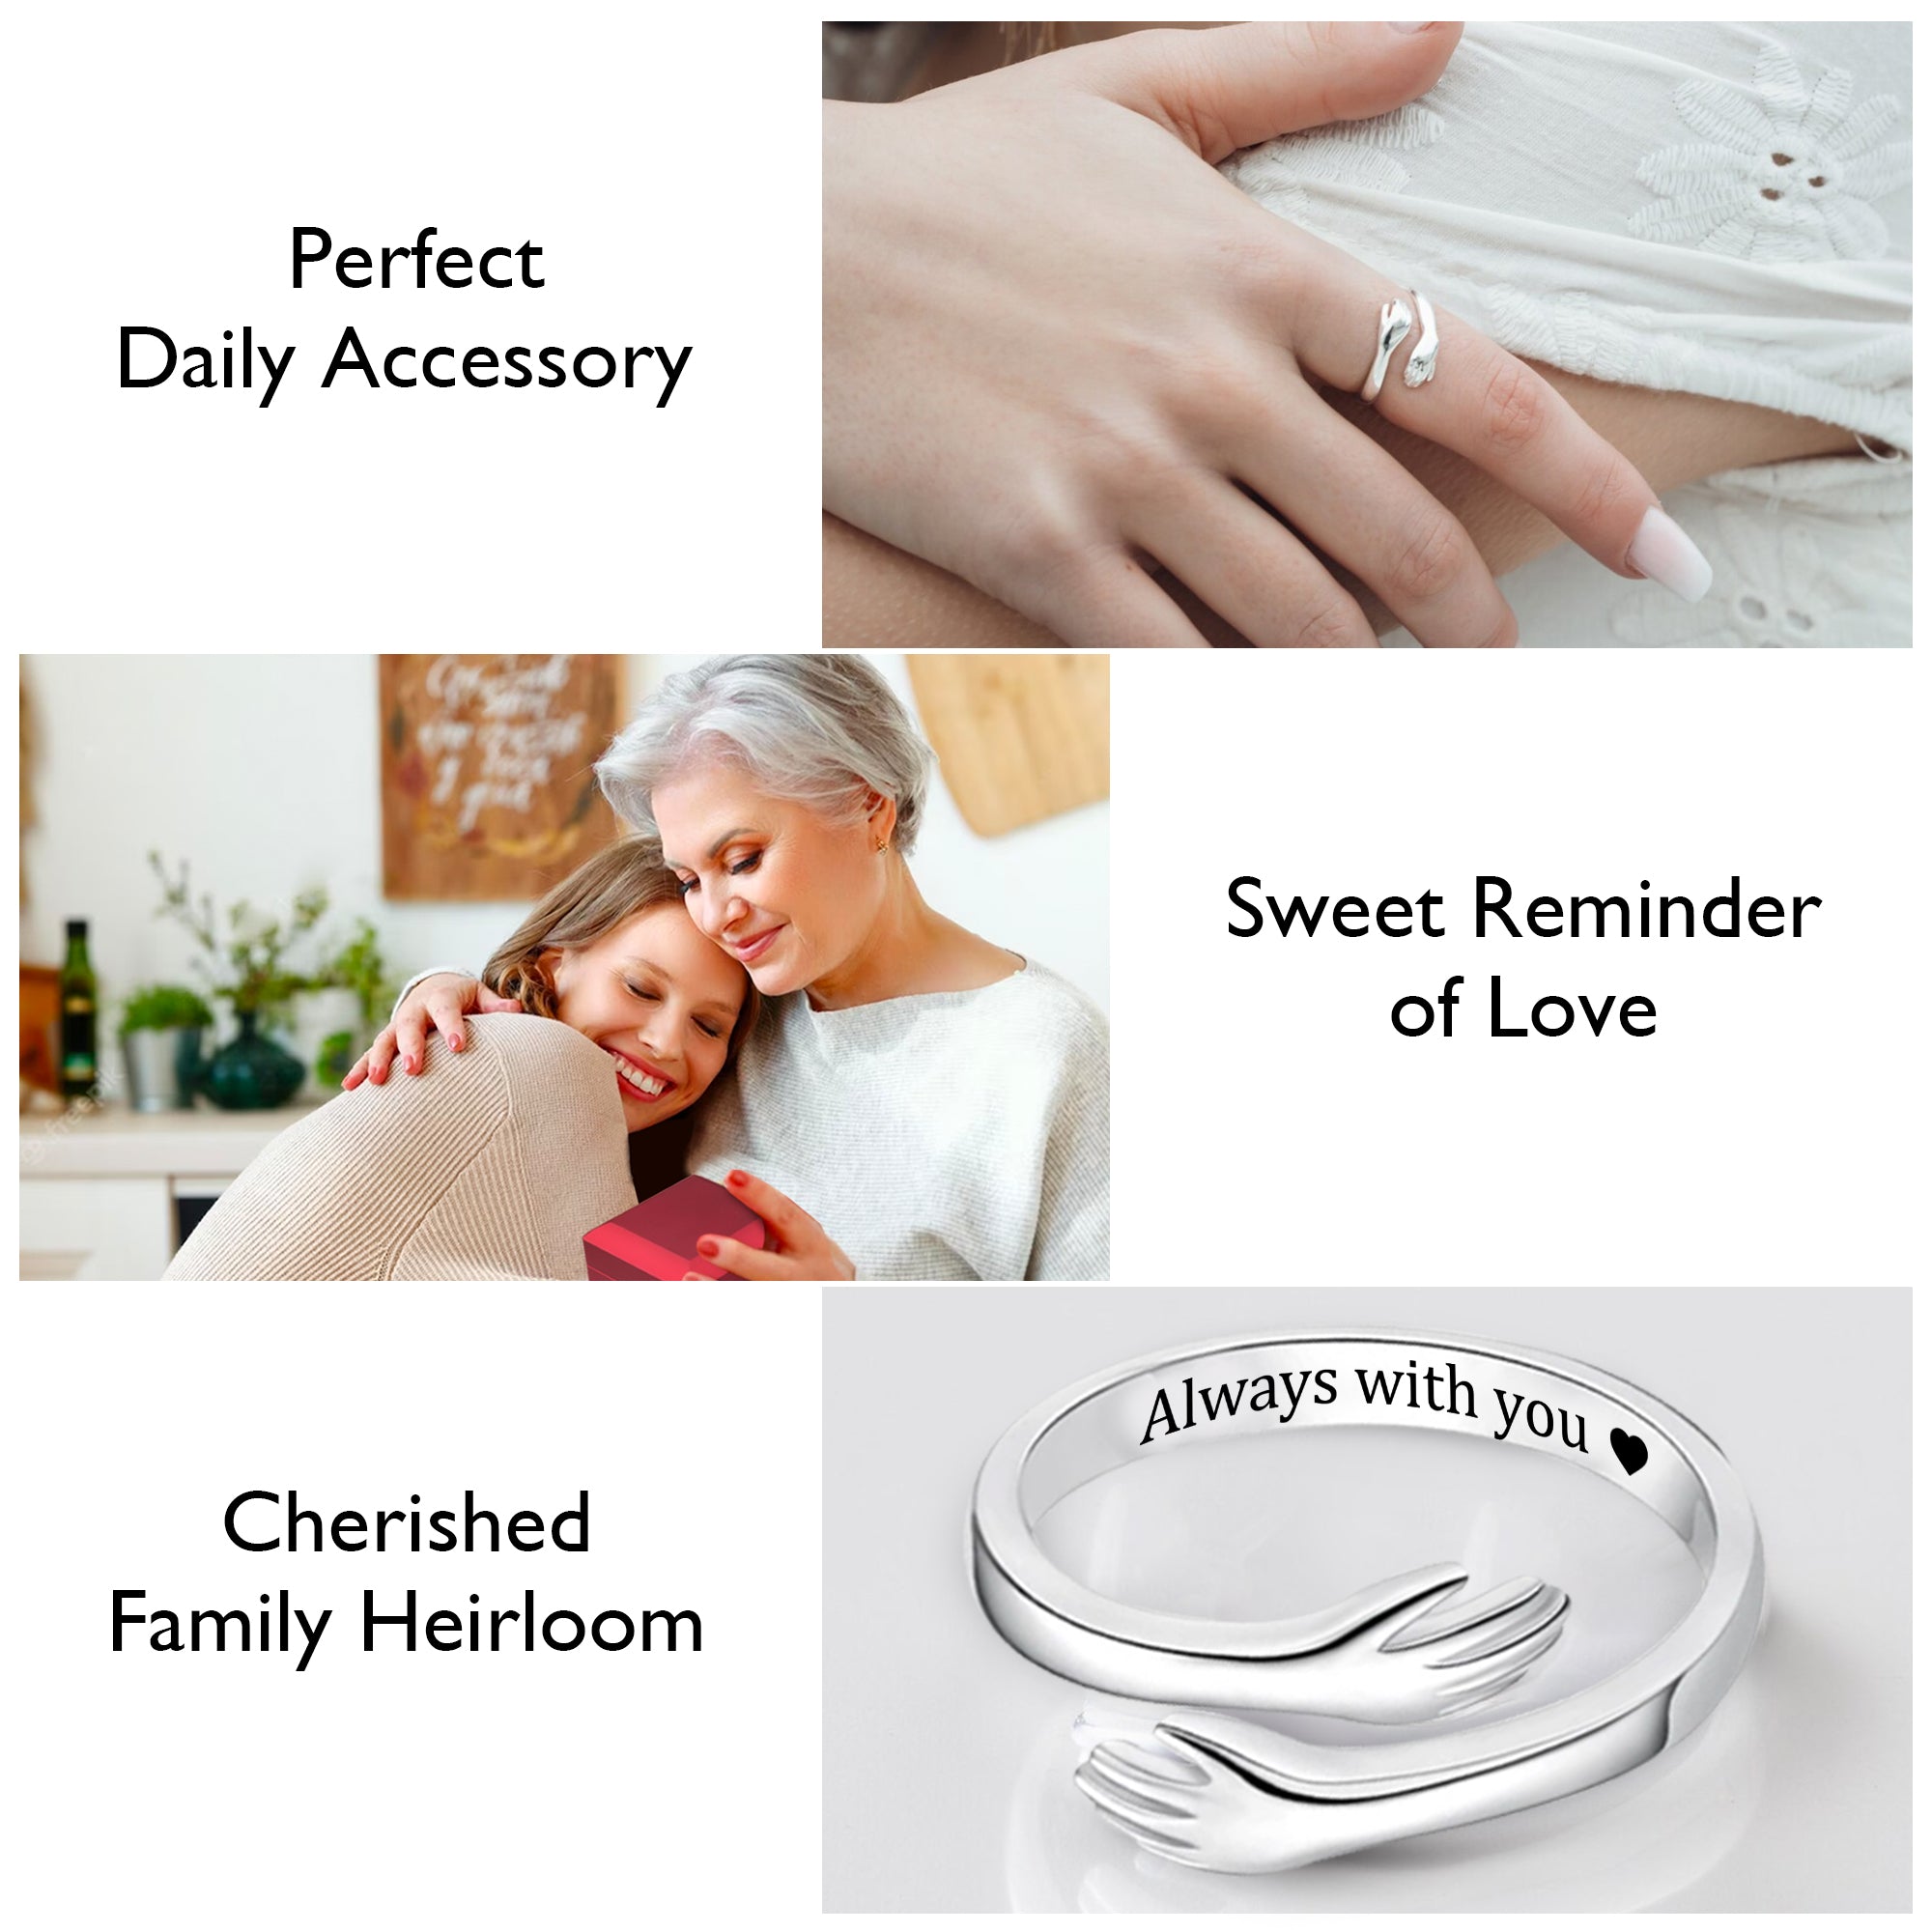 Wrapsify Personalized Hug Ring Apparel & Accessories - Family Birthday Gift For Granddaughter - Gyk23005